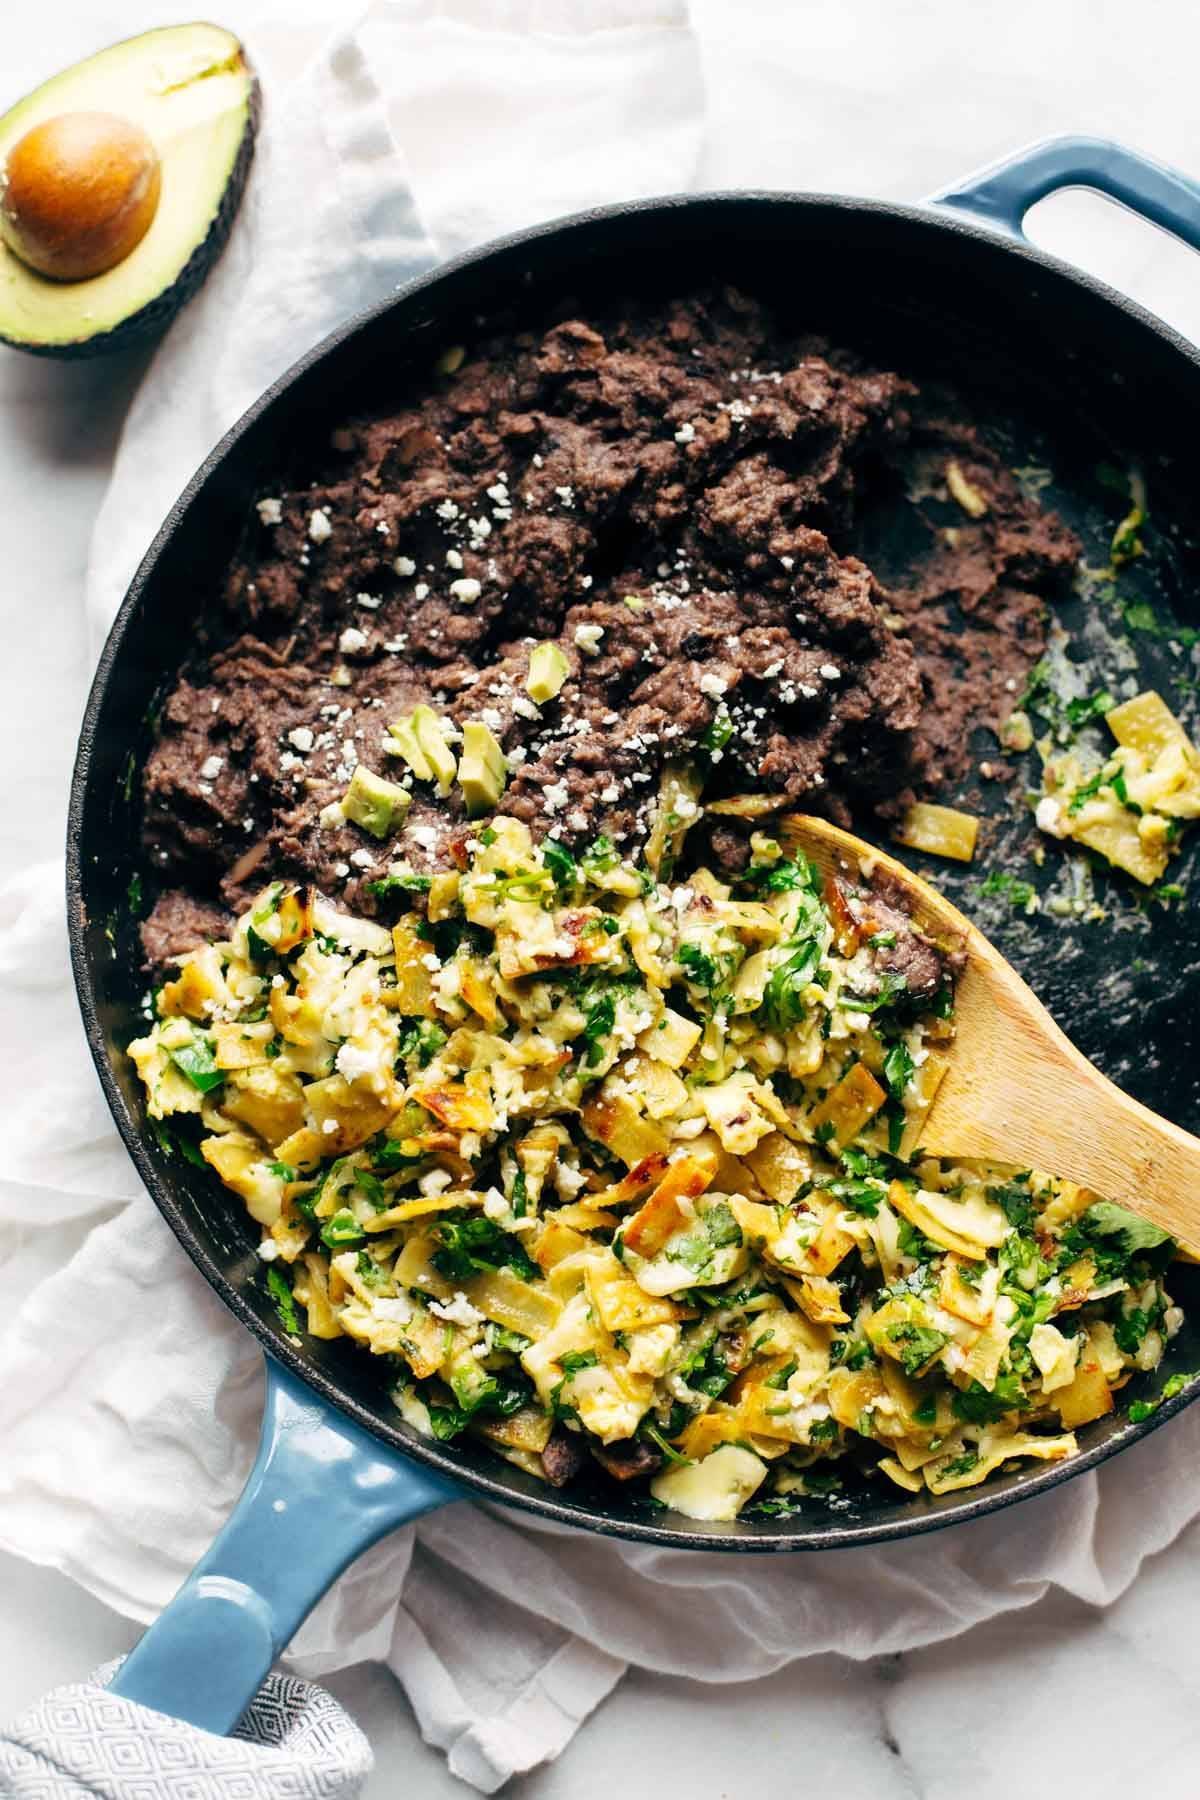 Migas - eggs scrambled with crispy tortillas, garlic, jalapeño, and melted cheese served with black beans and avocado. Quick, easy, and SO DELICIOUS. Breakfast, lunch, dinner, or brunch! | pinchofyum.com